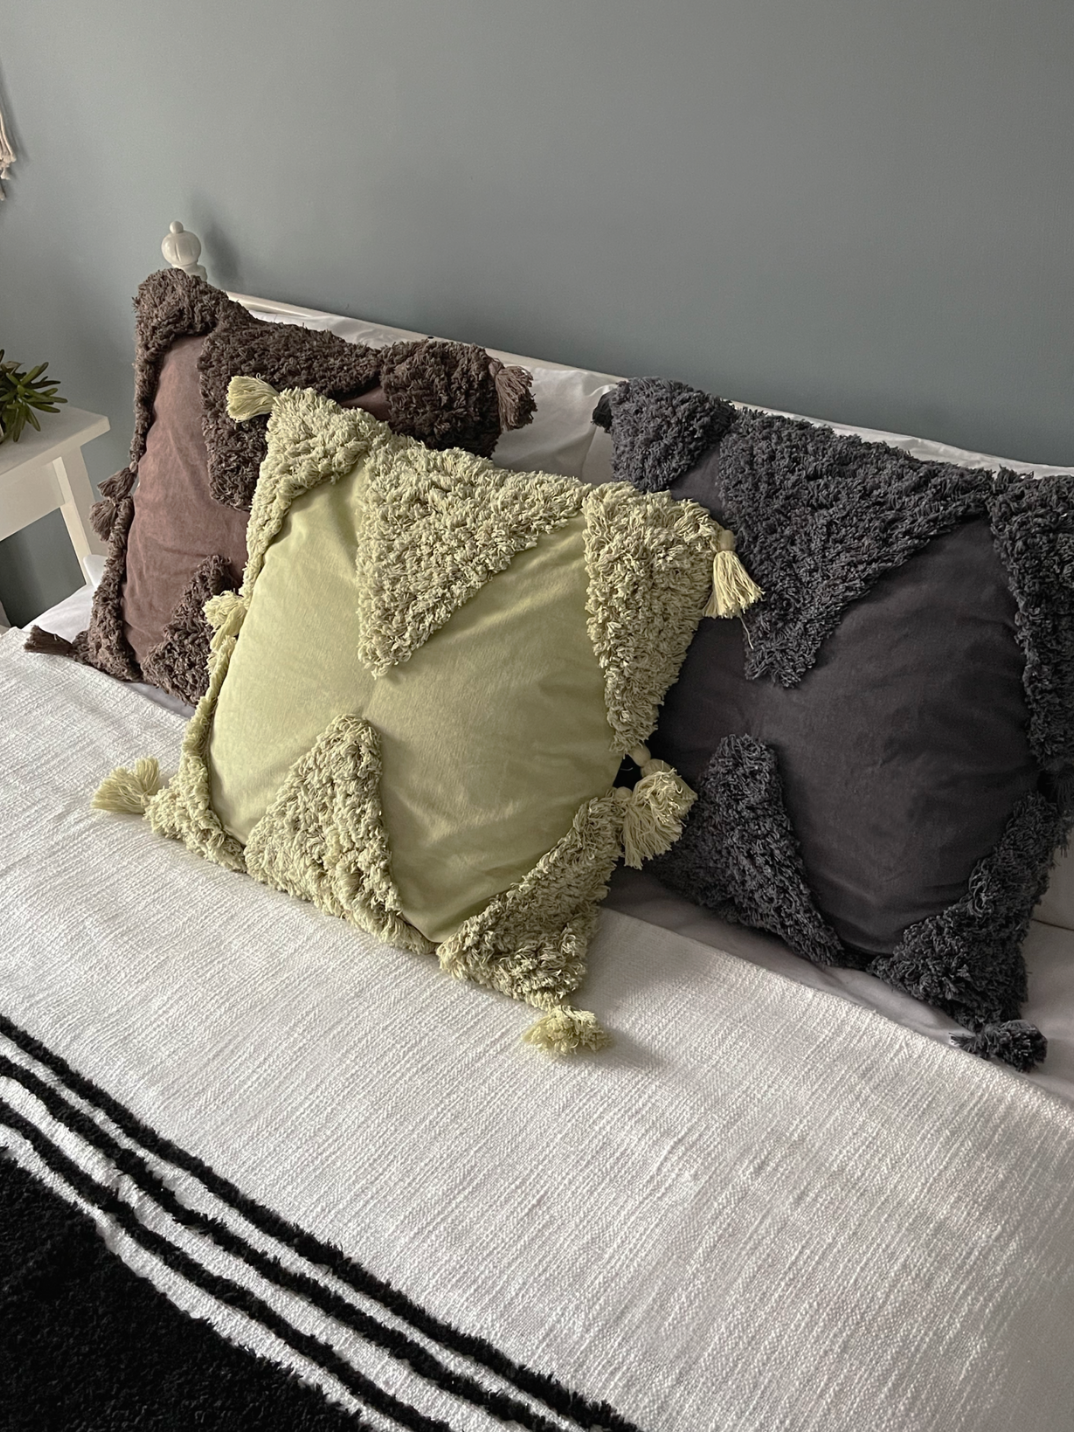 This simple soft white slub cotton throw is elevated with bold luxurious tufted black stripes and thick tassels on each corner, giving you the perfect understated luxury aesthetic.